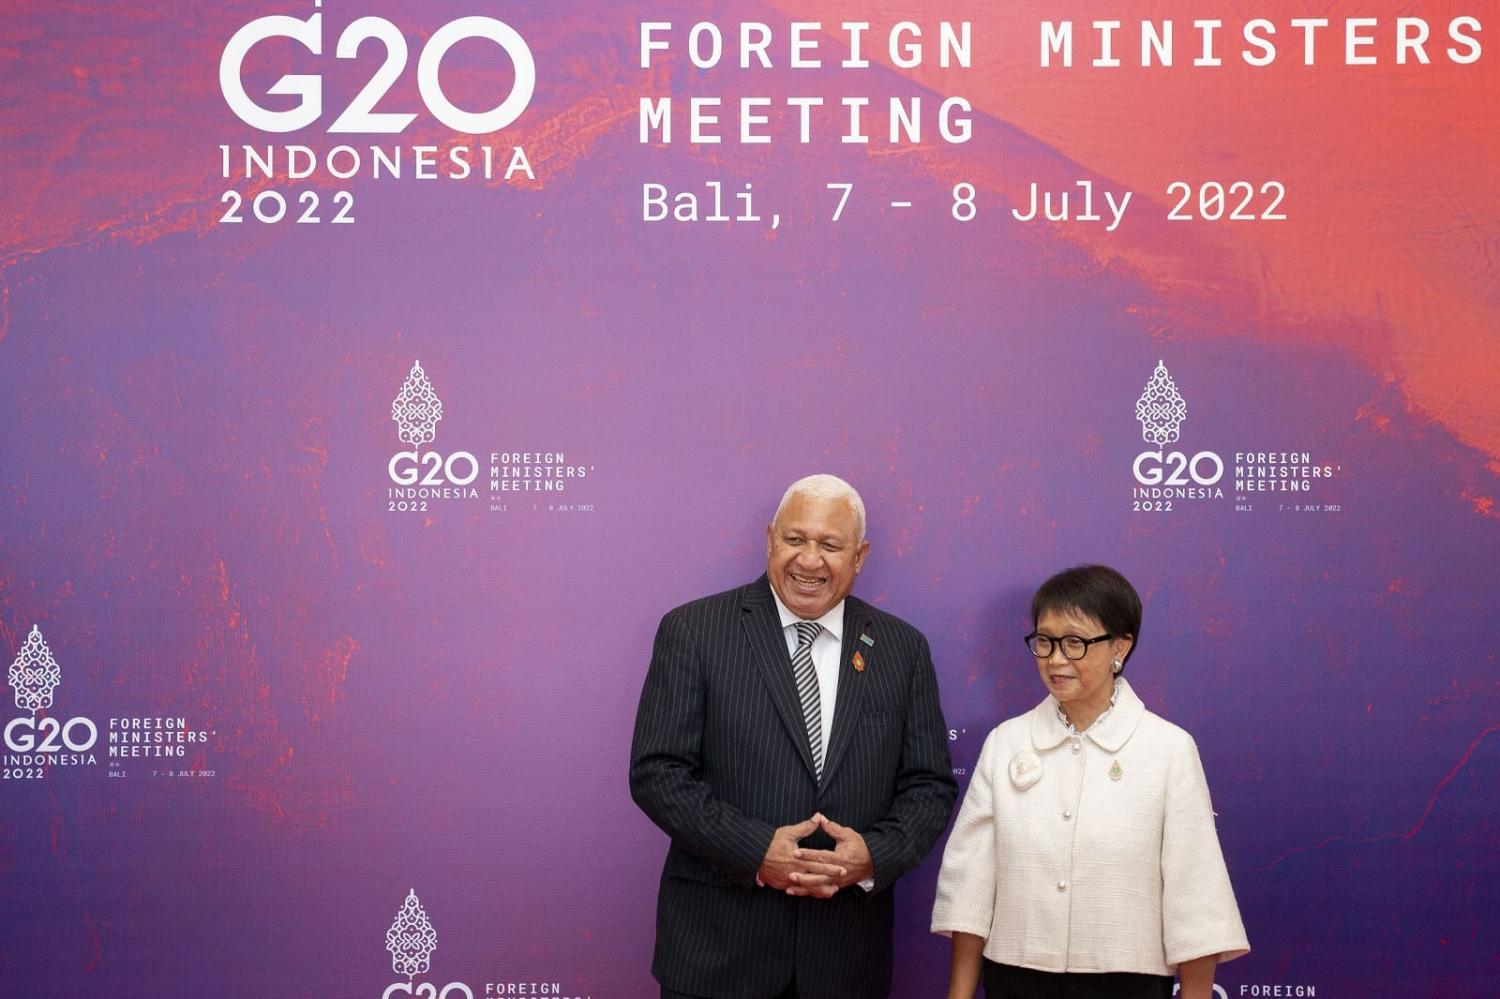 Indonesian Foreign Minister Retno Marsudi with Fijian Prime Minister Frank Bainimarama at the G20 Foreign Ministers Summit in Nusa Dua, Bali on 8 July 2022 (Stefani Reynolds/Pool/AFP via Getty Images)